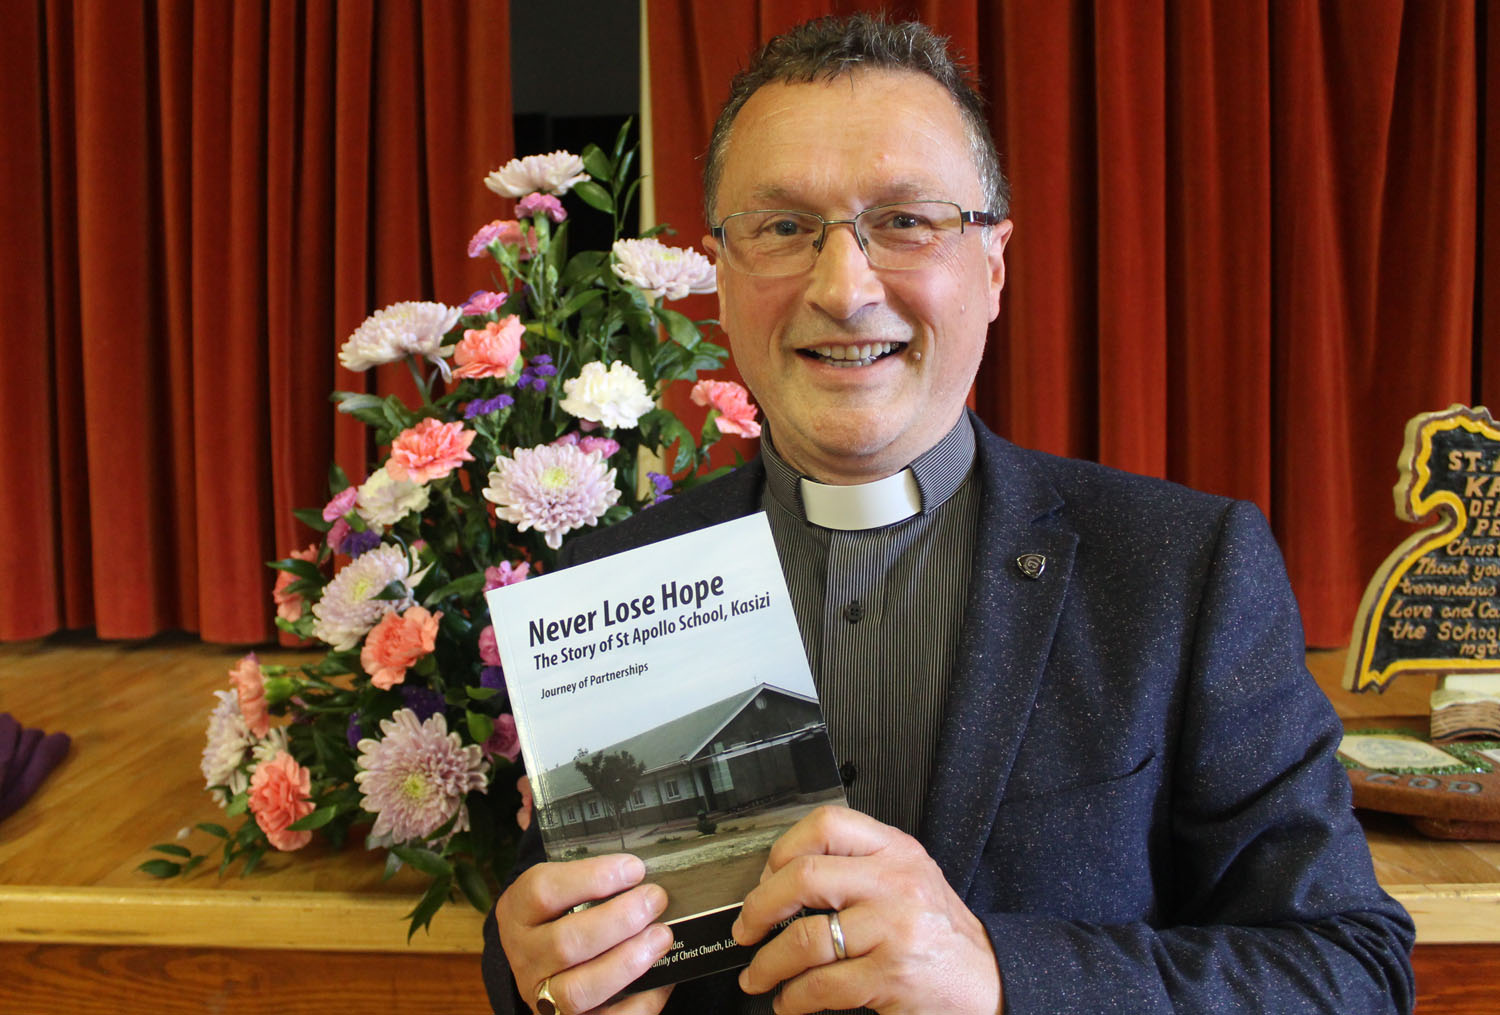 Archdeacon Paul Dundas with a copy of Never Lose Hope - the story of 'St Apollo School, Kasizi'.